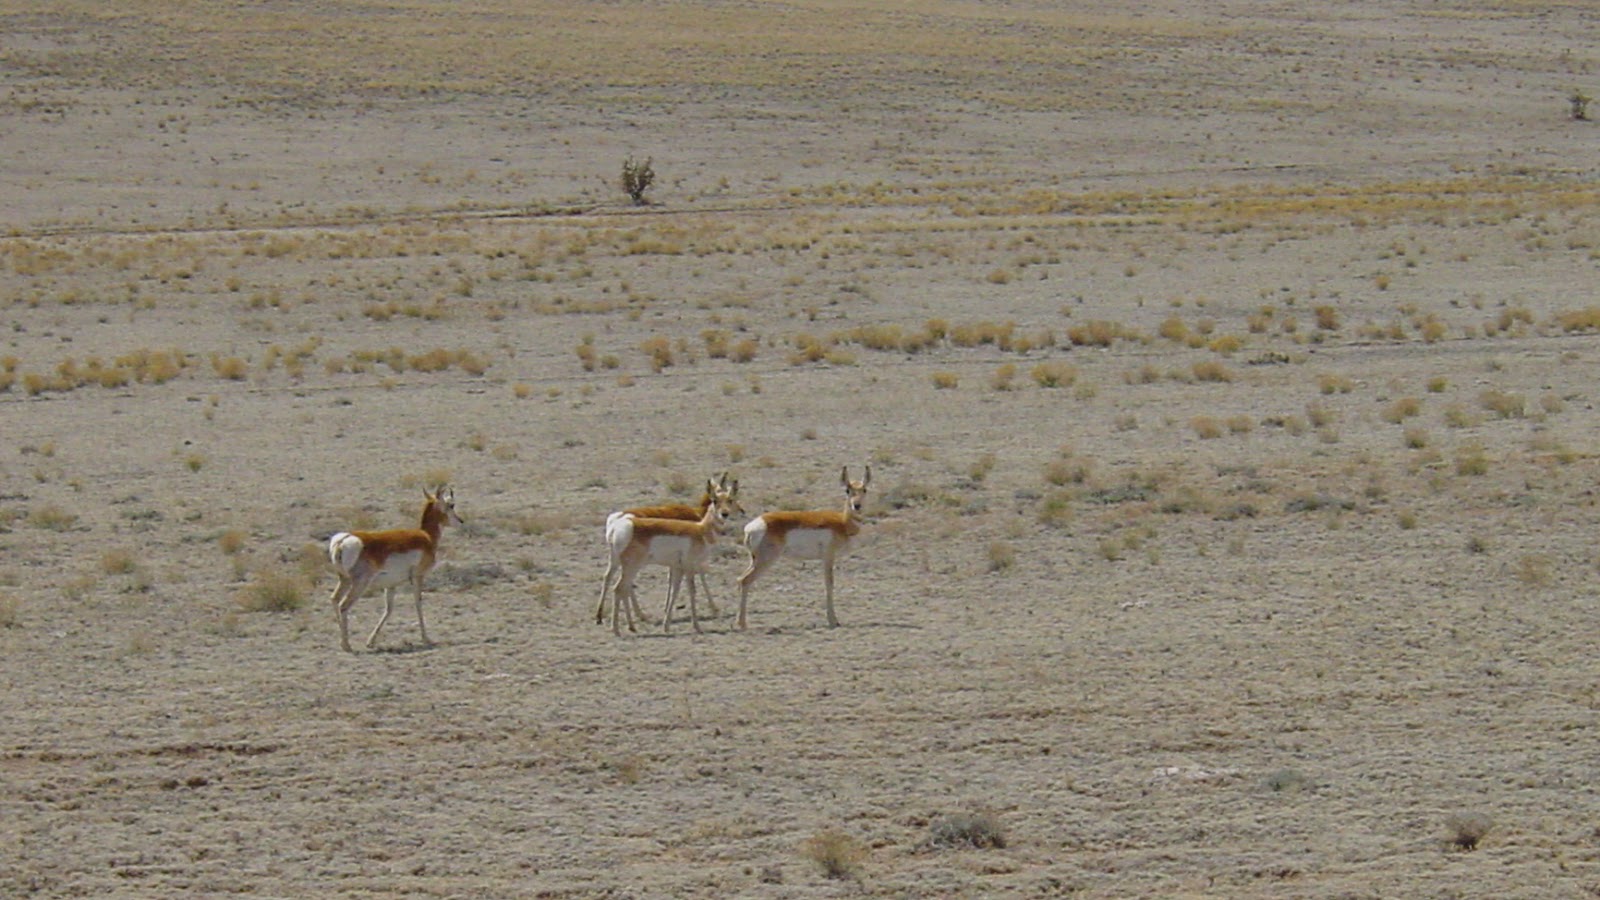 4 pronghorn in the distance. 